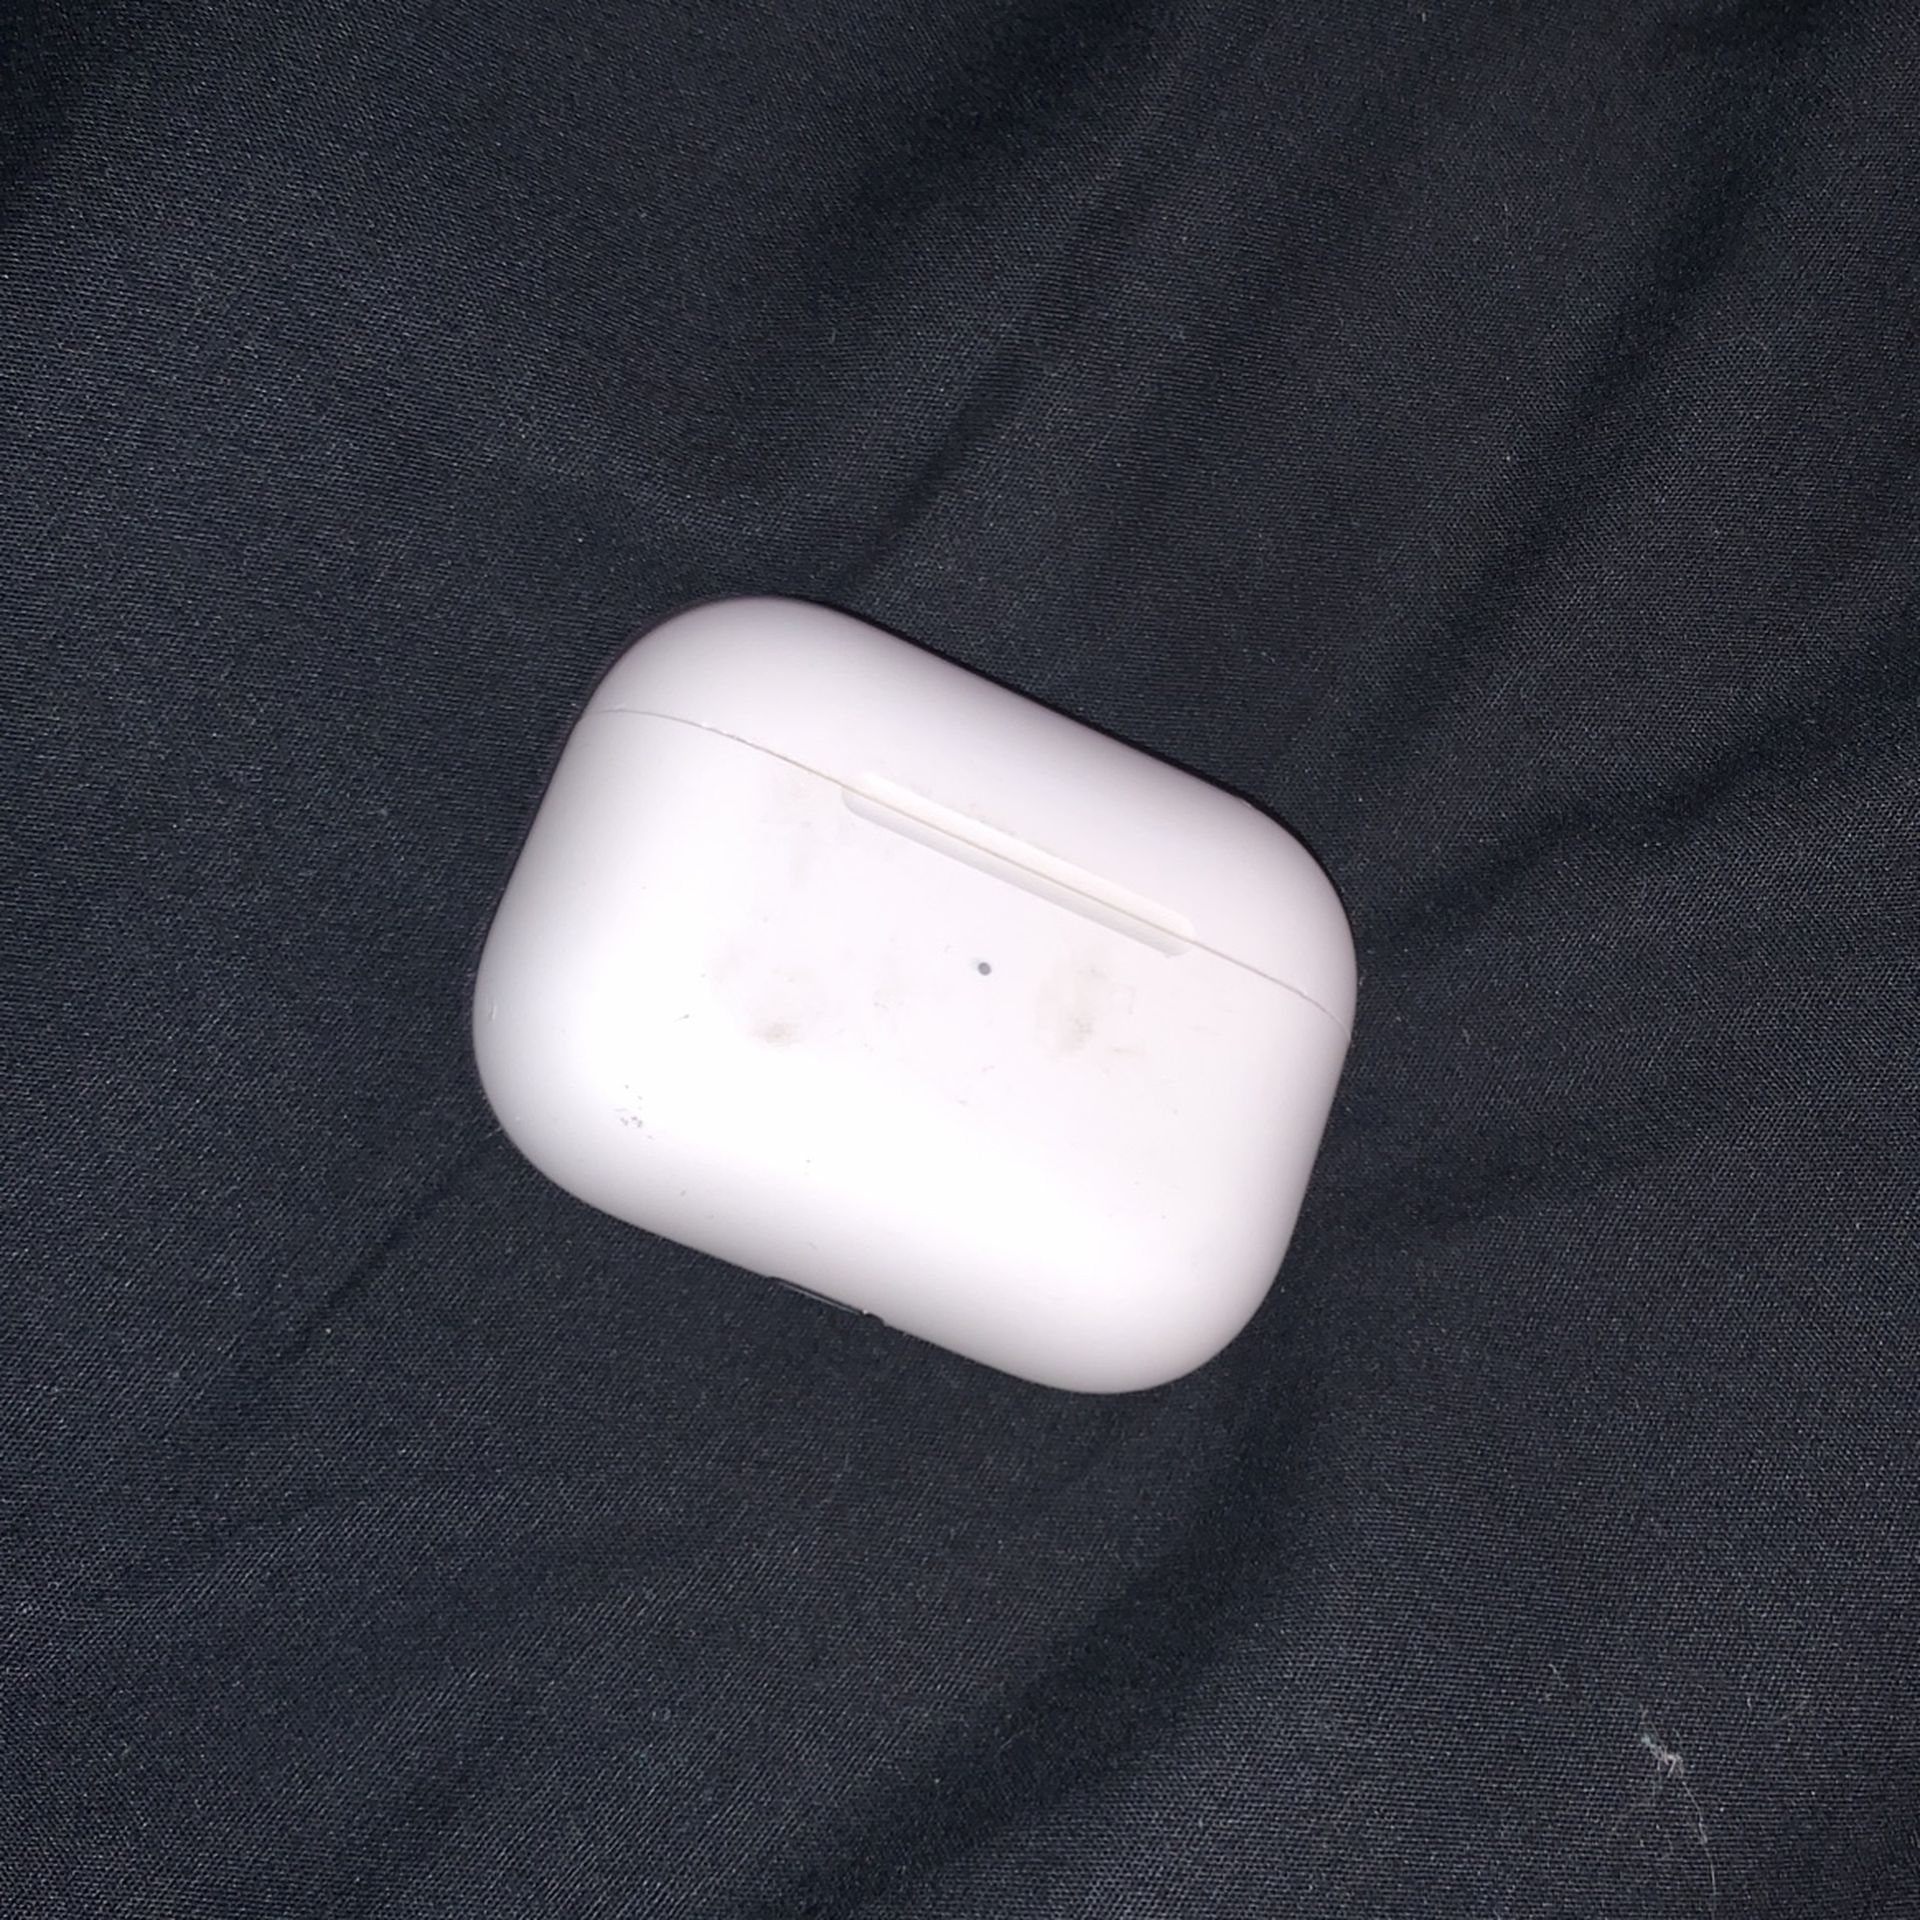 Airpod pro with one earbud